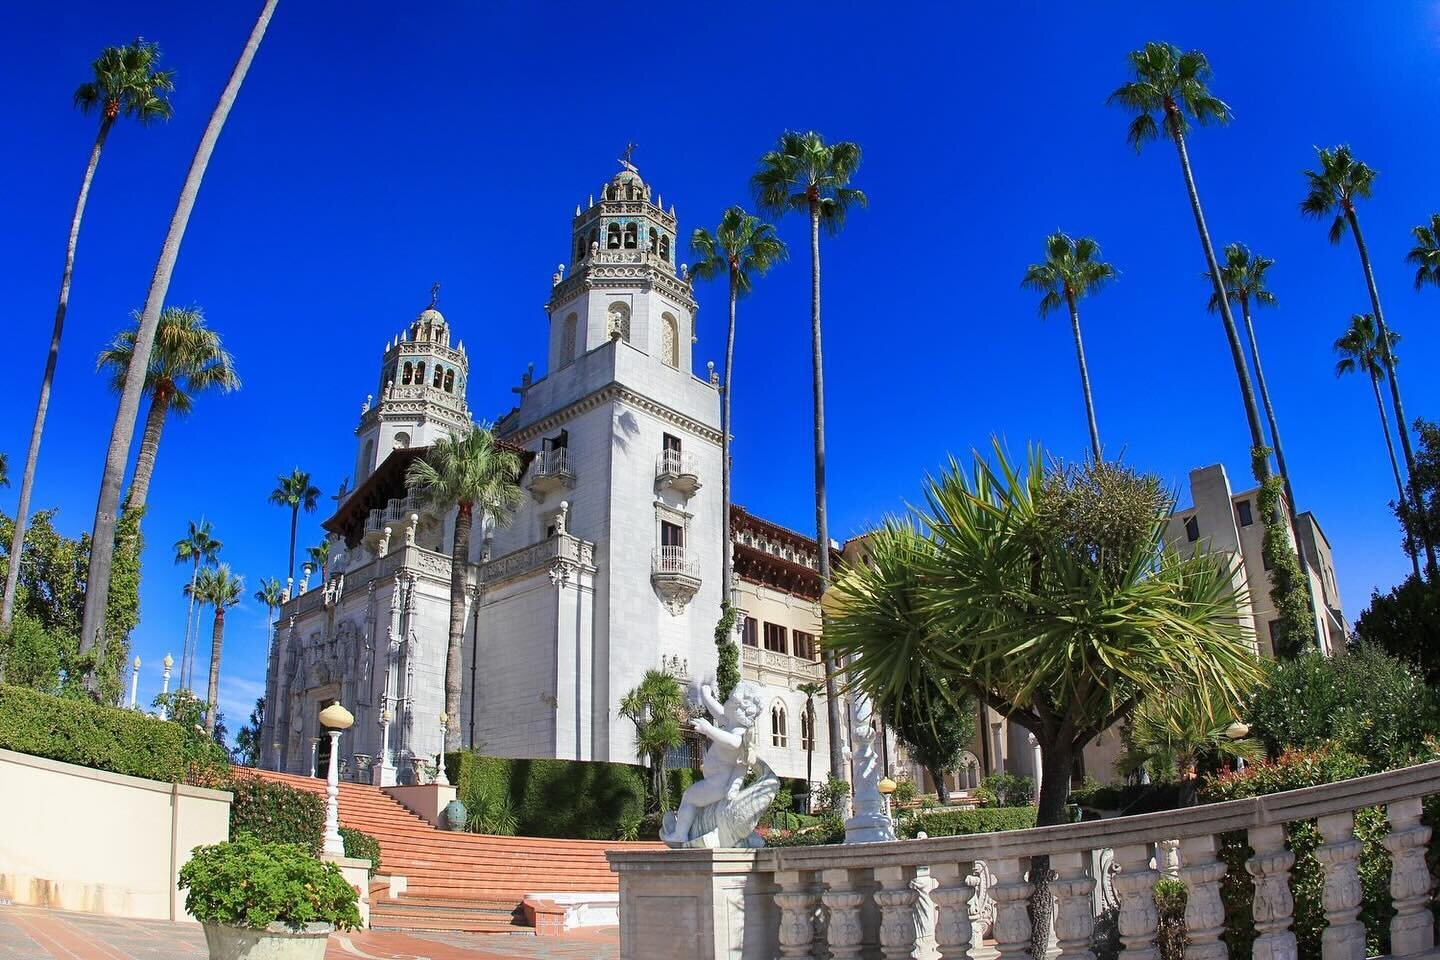 Interested in visiting Hearst Castle? In my latest post, I go through the different tour types including wheelchair accessible tours and discuss which is best. I also give you information on how to get to Hearst Castle and what to do in the San Simeo